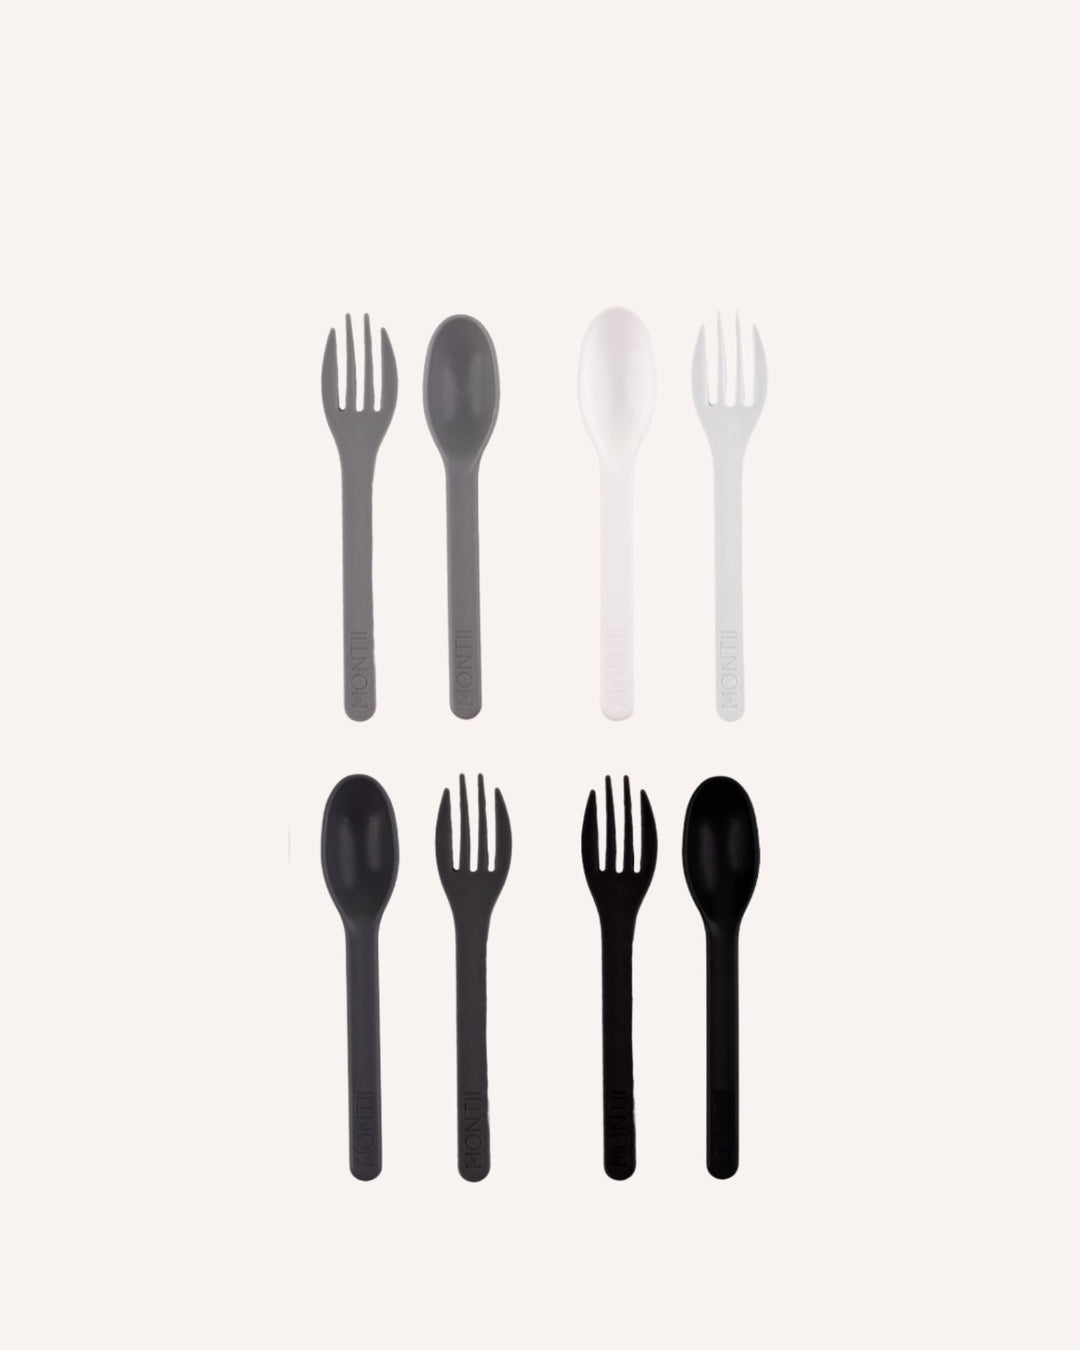 MontiiCo Out & About Cutlery Set - Monochrome